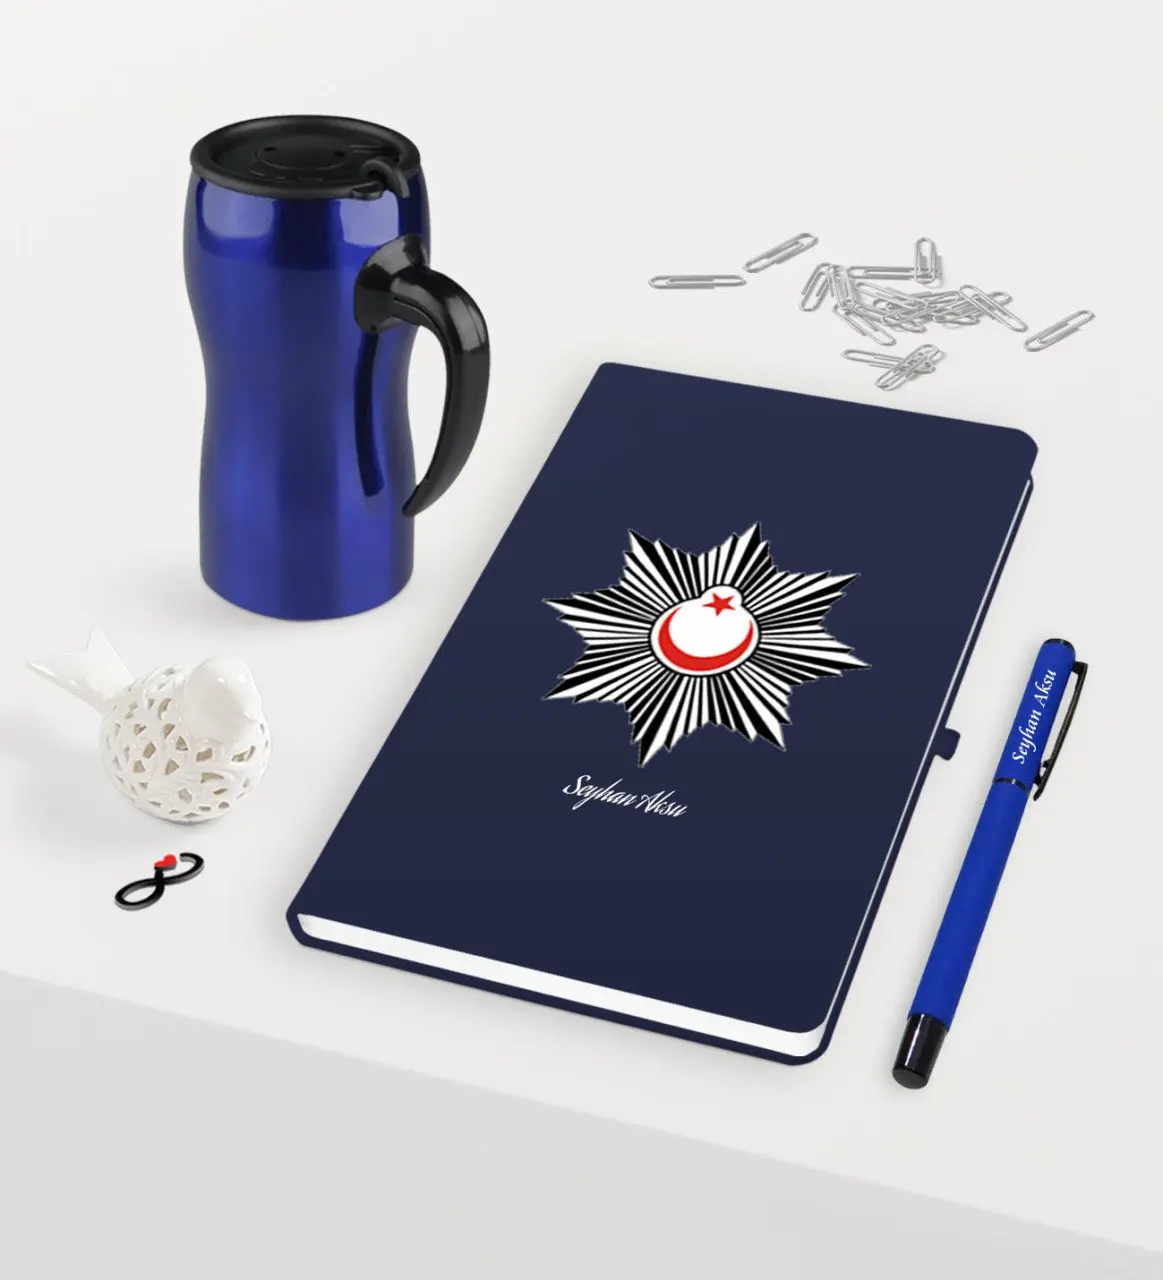 

Personalized Cop Themed Navy Blue Notebook Pen Thermos Mug Set-1 Reliable Modern Simple Gift Special Design Good Quality Surprise